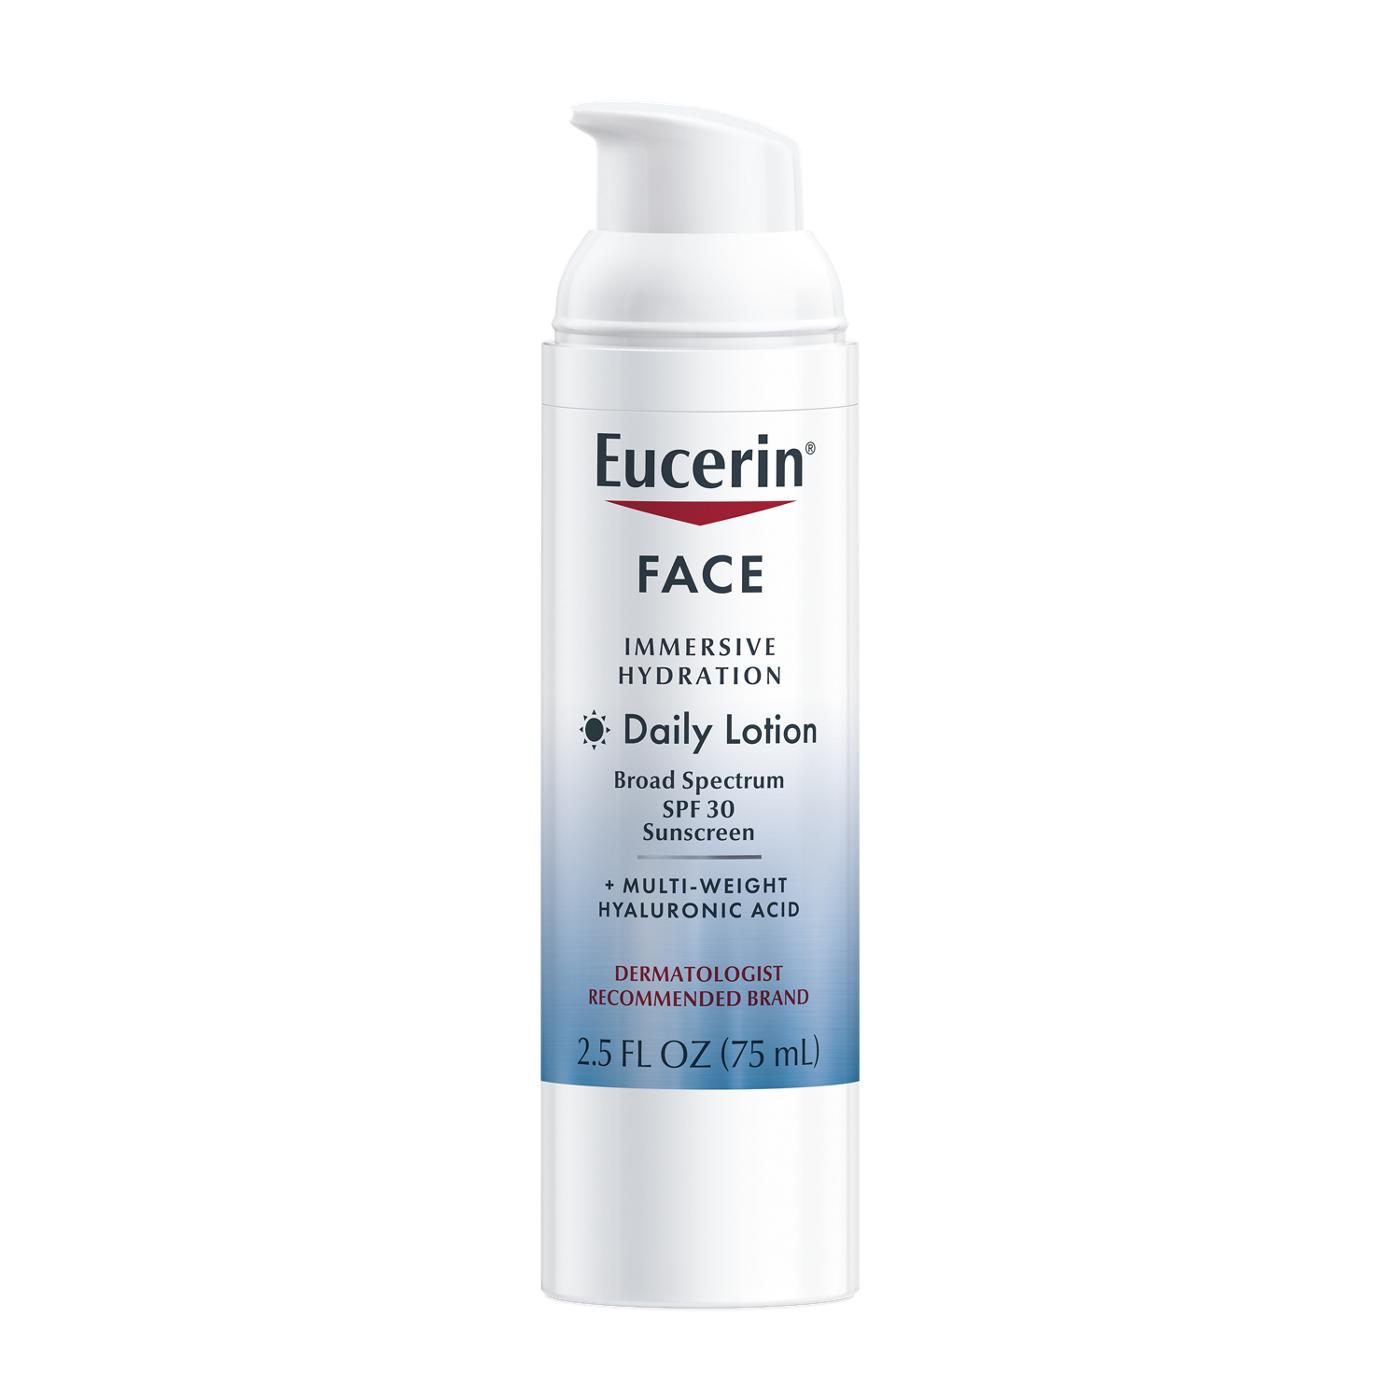 Eucerin Face Immersive Hydration Daily Lotion SPF 30; image 1 of 2